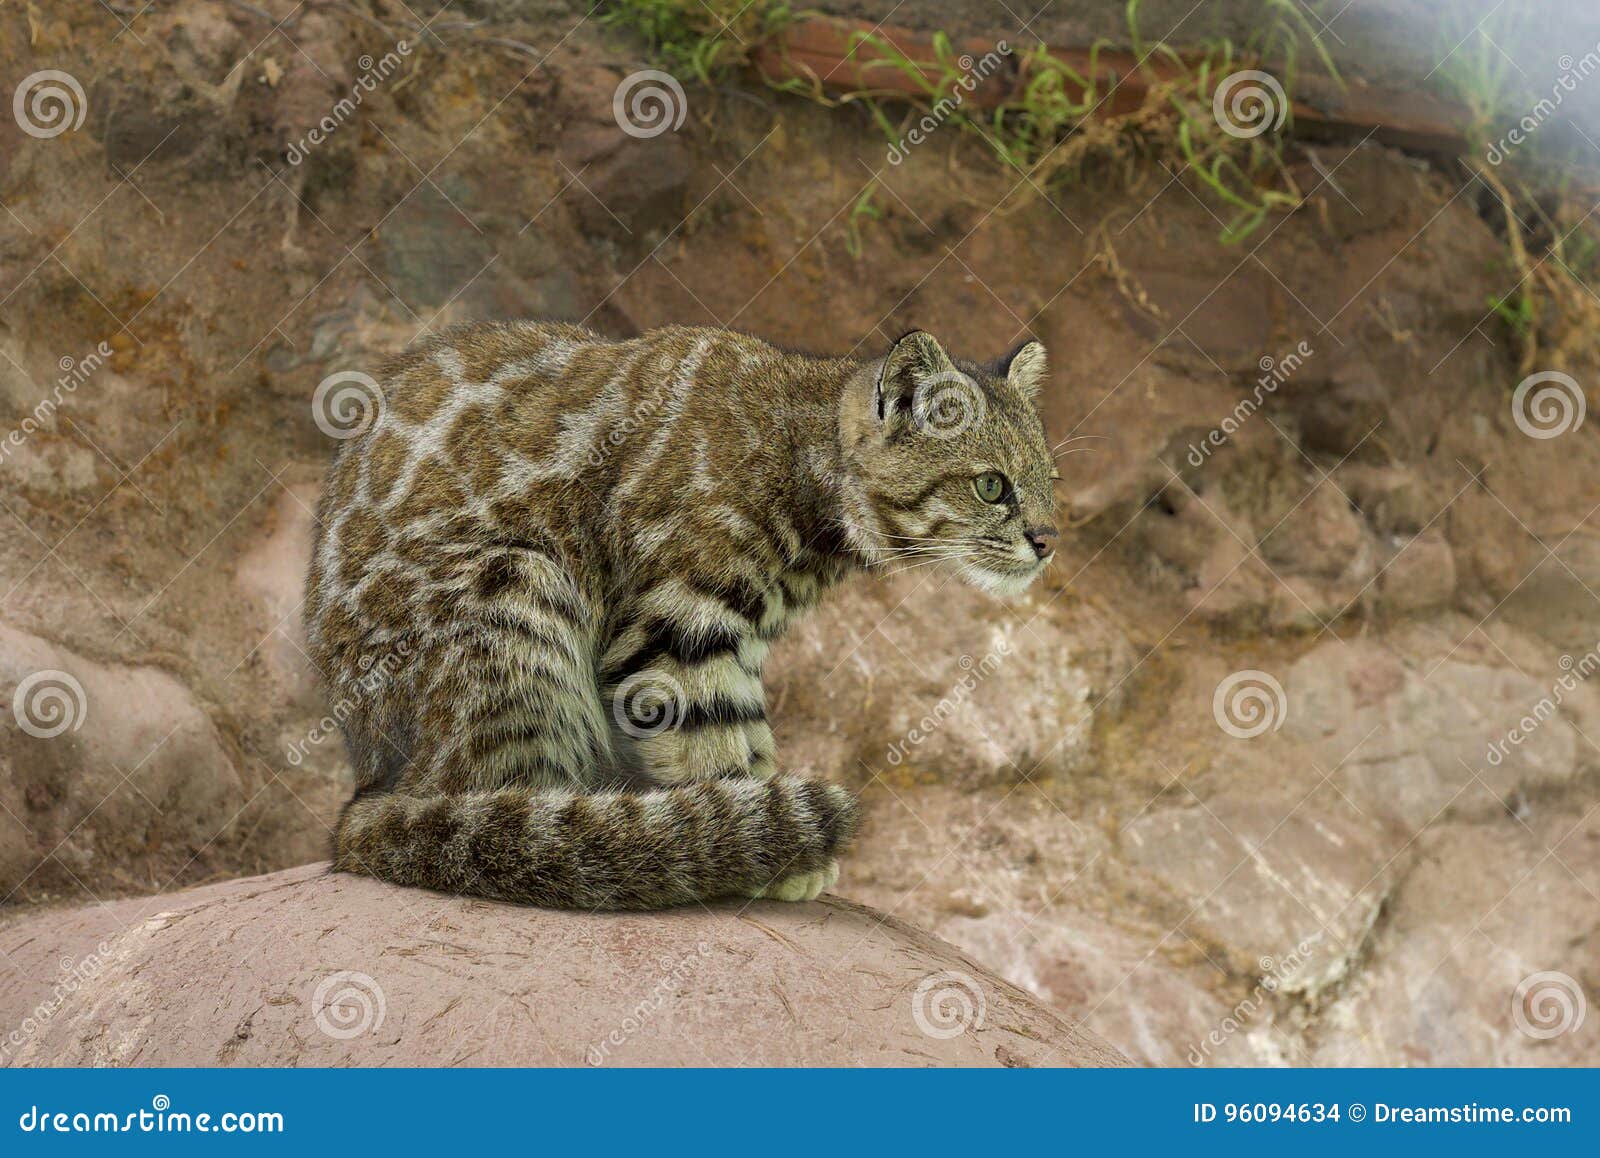 andean mountain cat